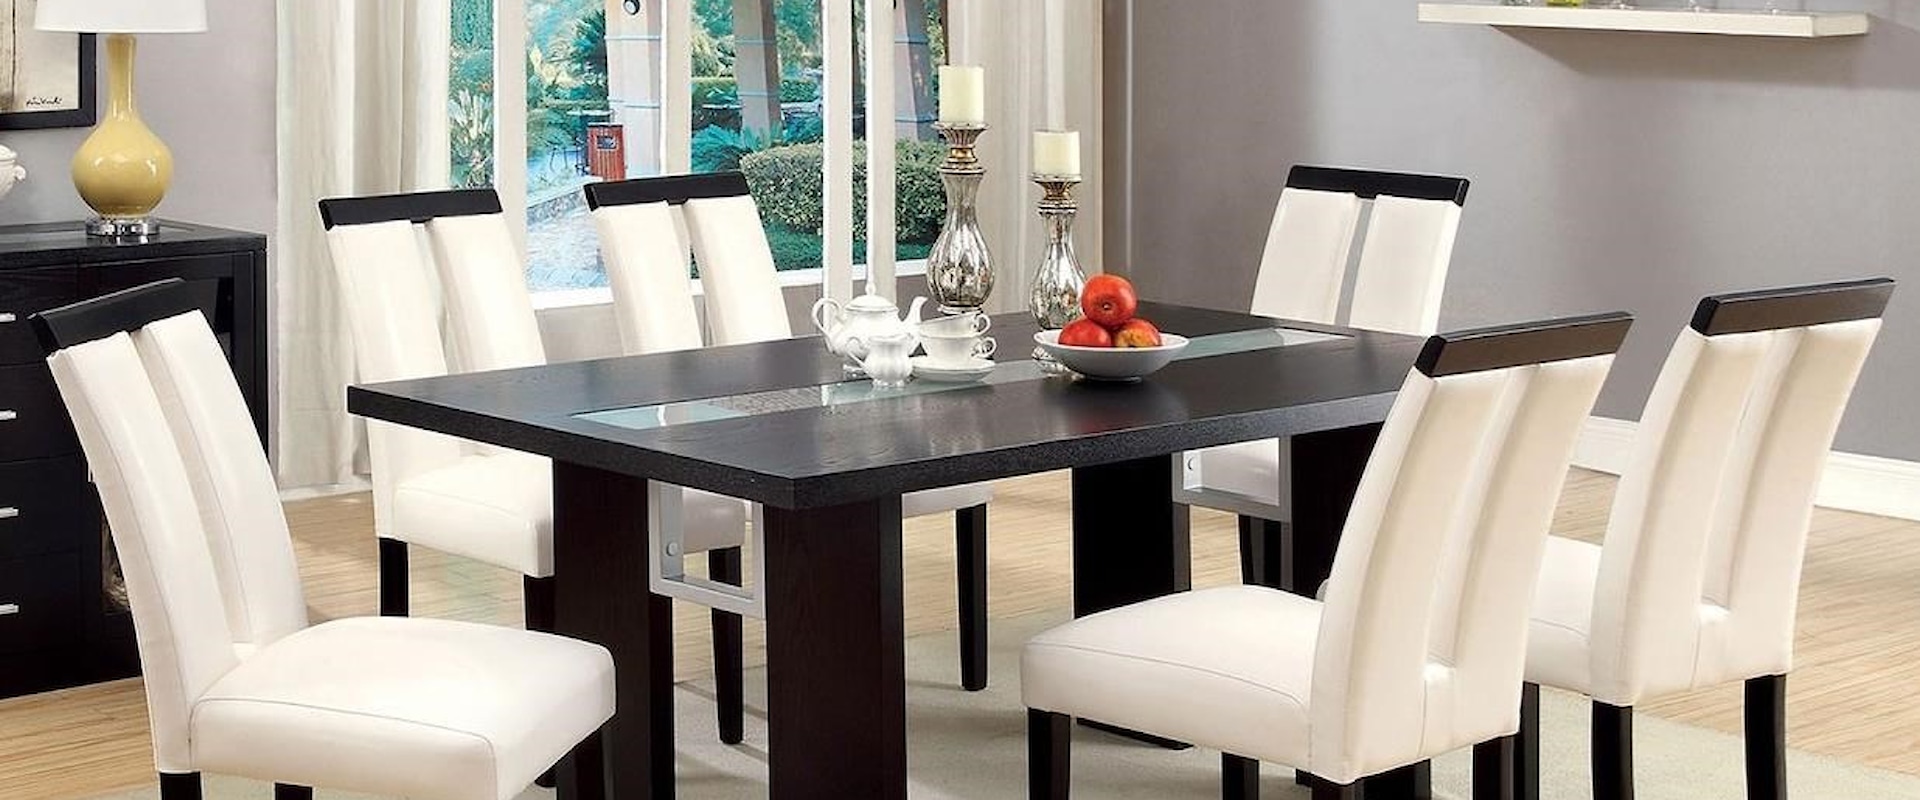 Dining Room Set with Six Chairs